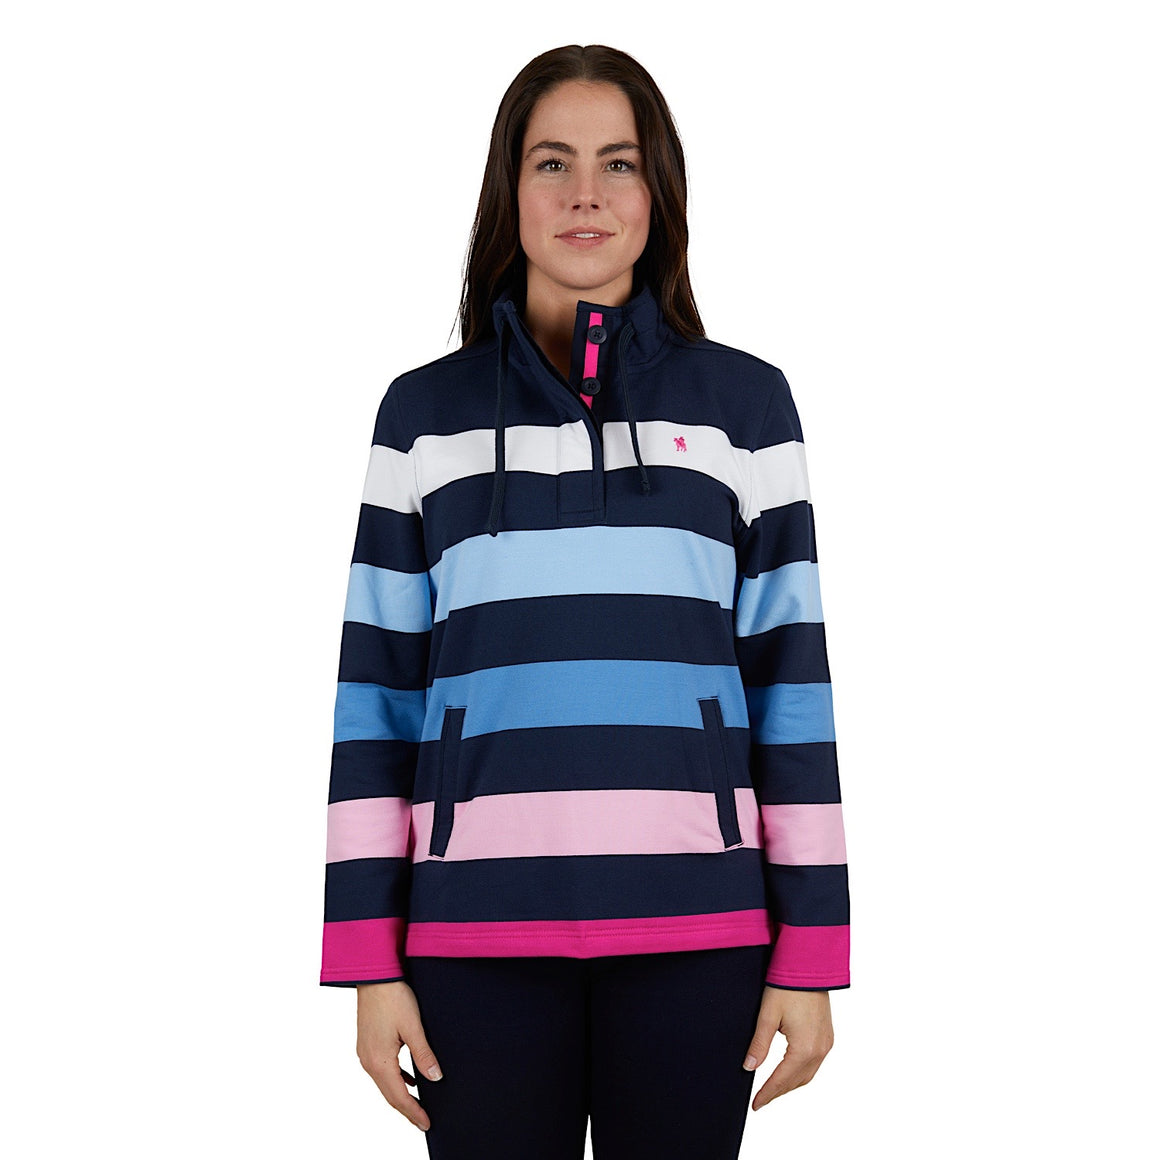 Thomas Cook Womens Orla Stripe Rugby Navy/Multi